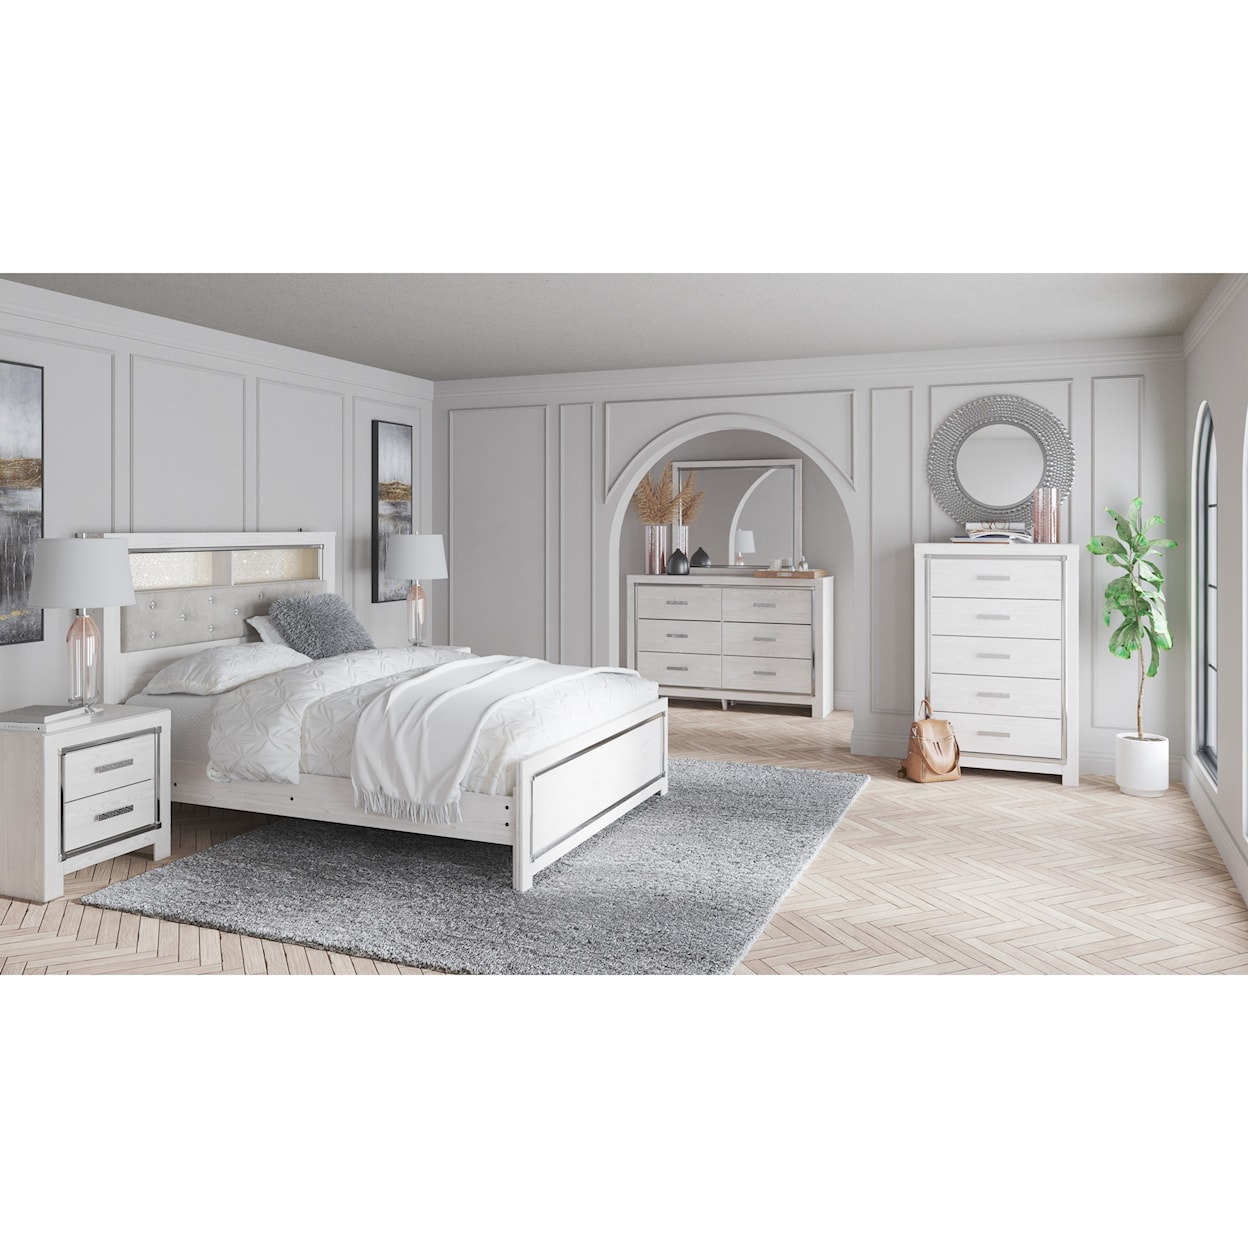 Ashley Furniture Signature Design Altyra Twin Bedroom Group